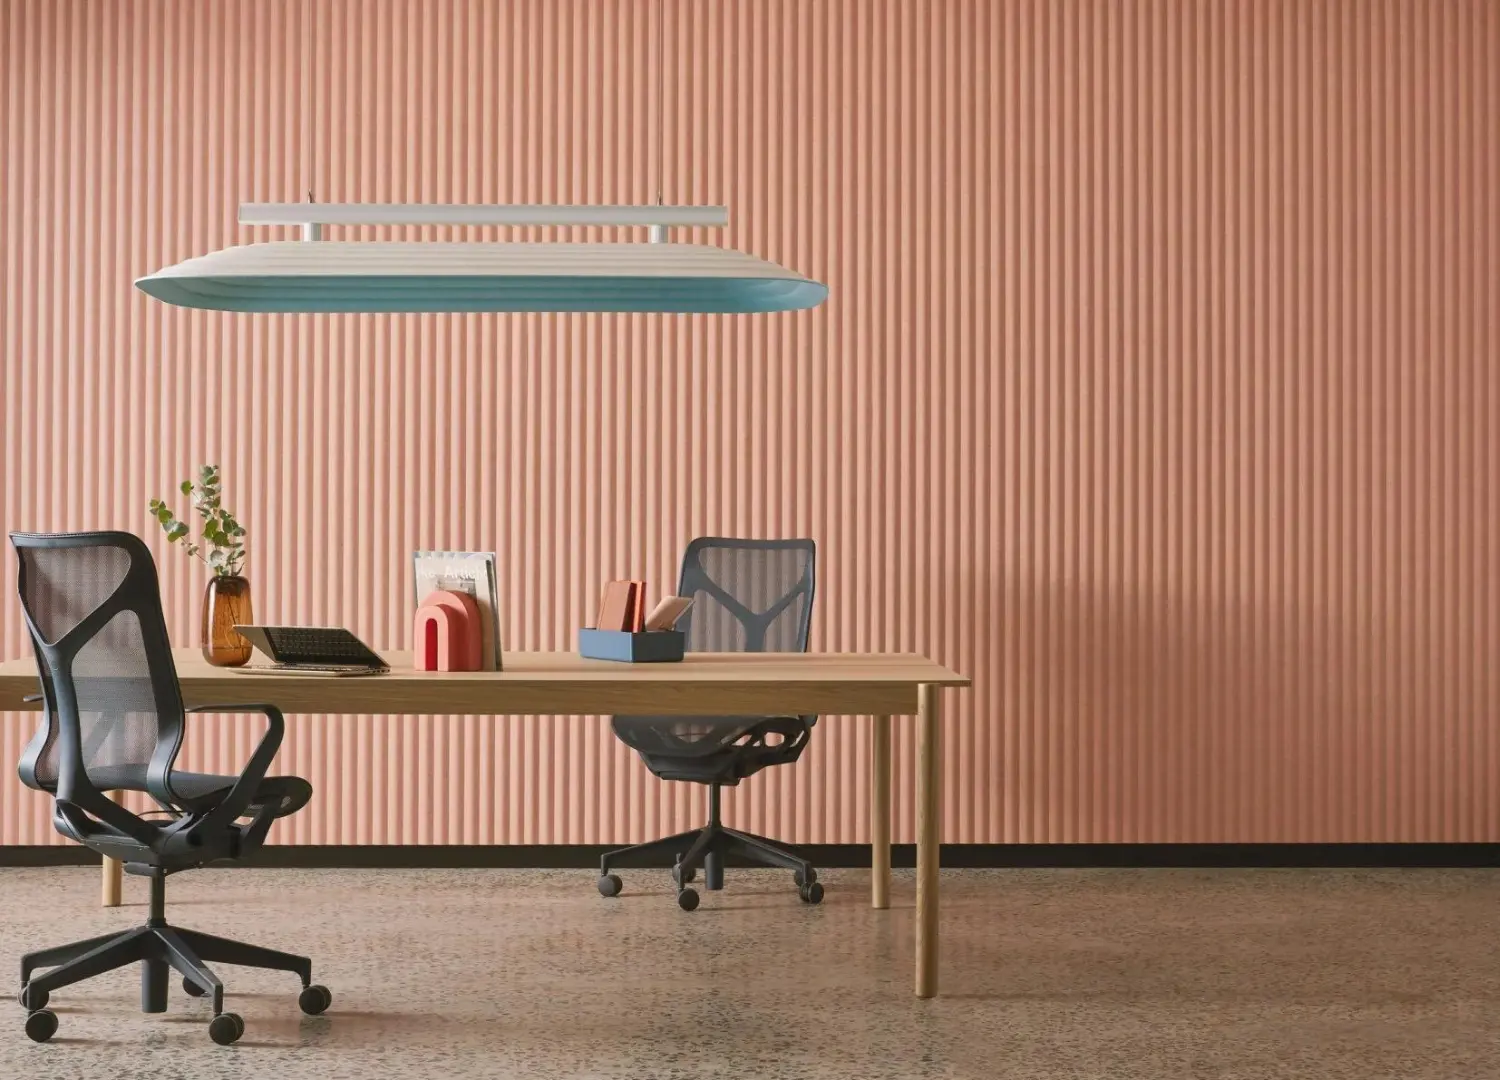 Fuji by Woven Image / Acoustic products – 5 sustainable designs ideal for your workspace